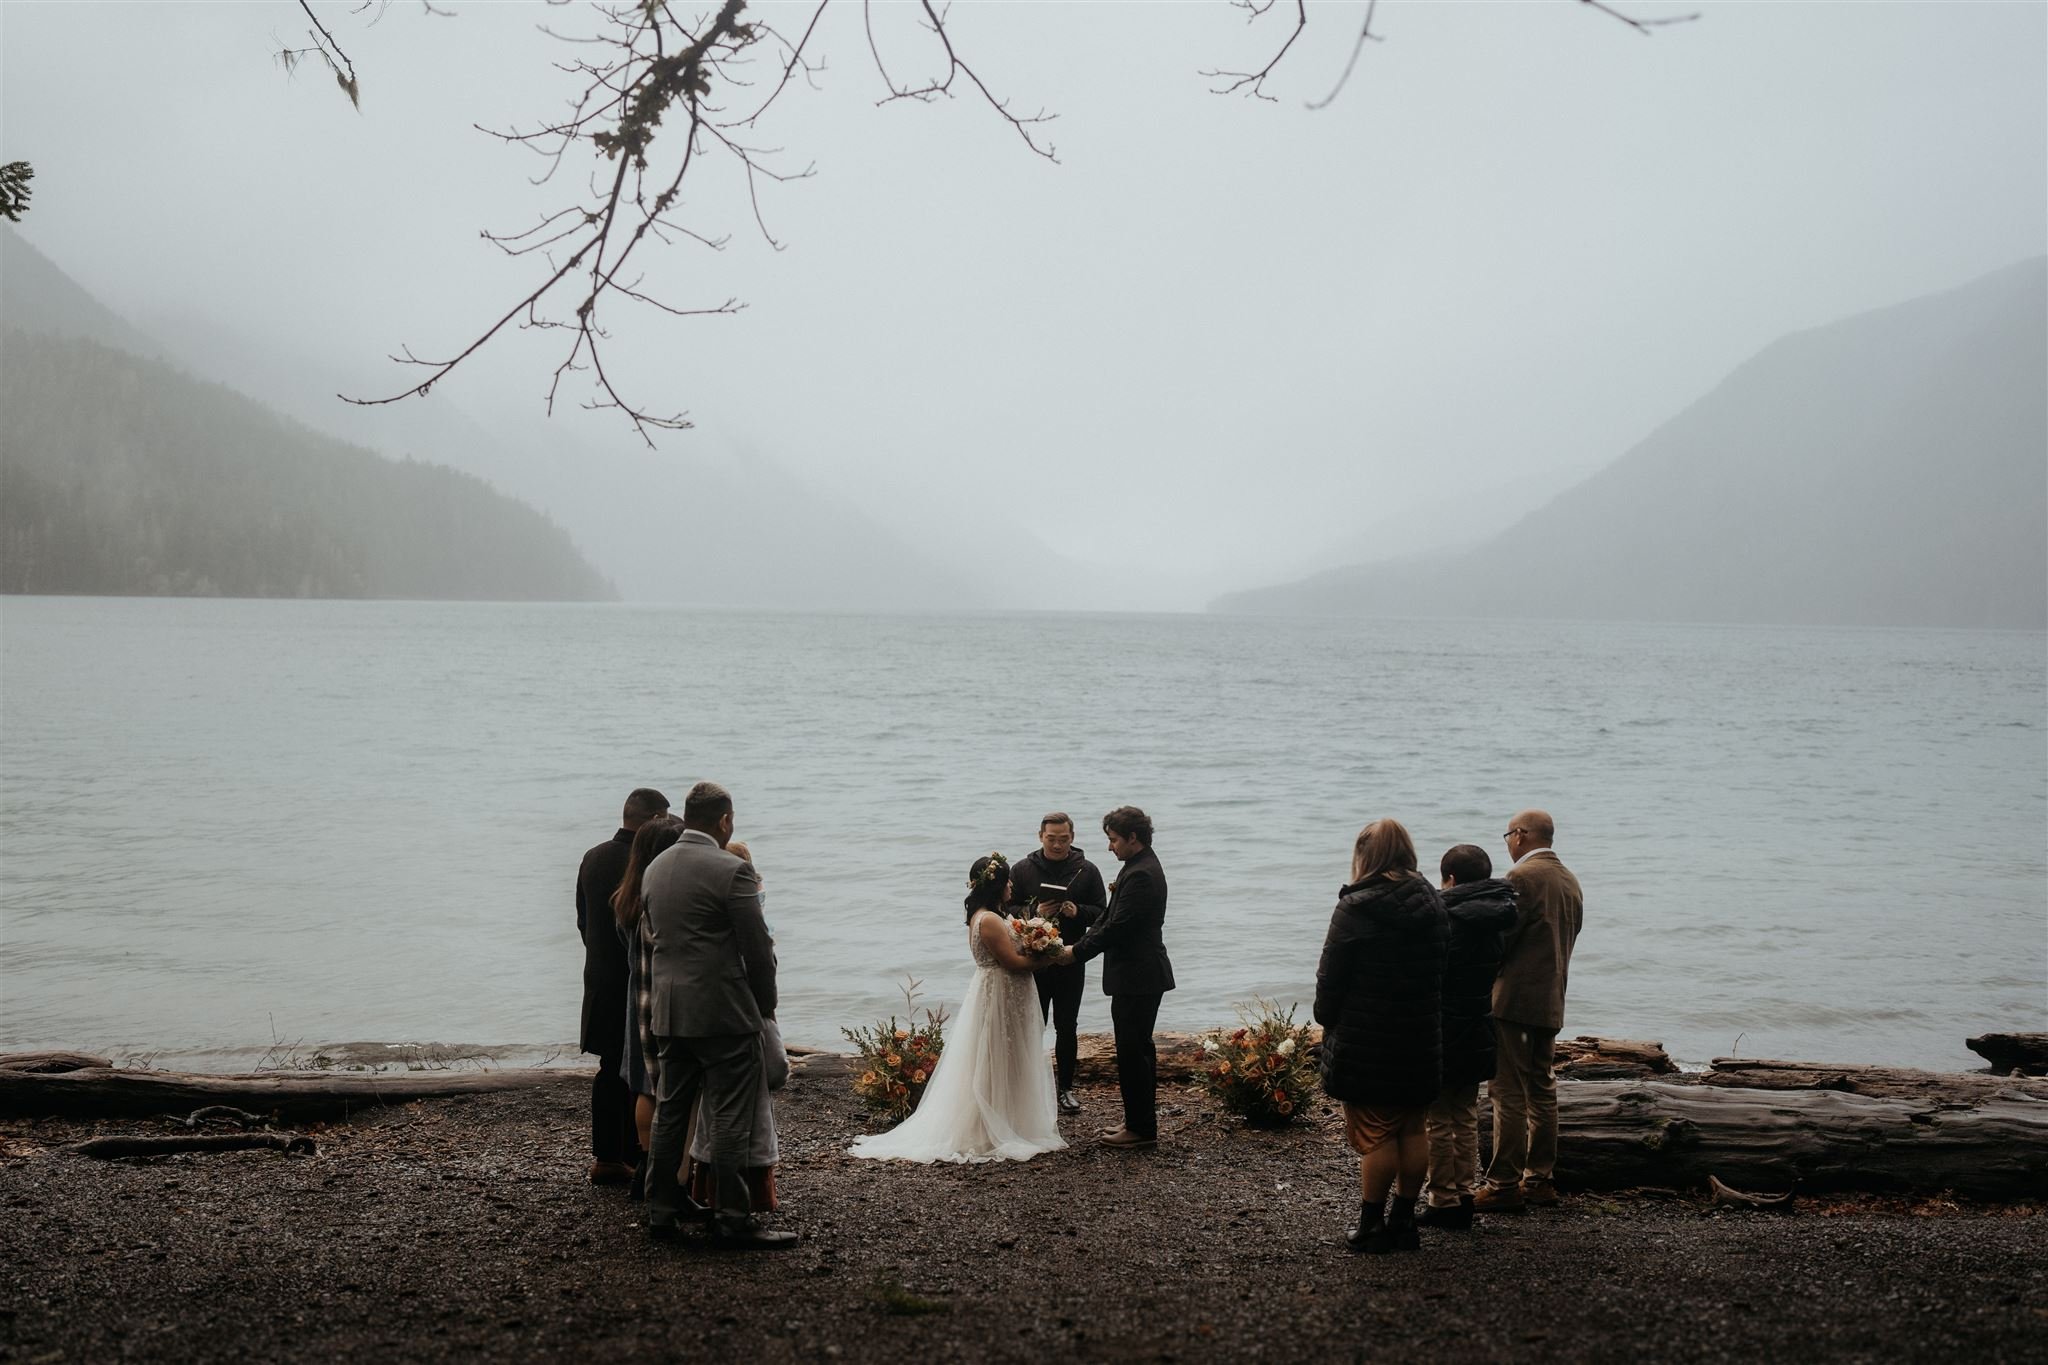 Intimate wedding ceremony by the water in Olympic National Park